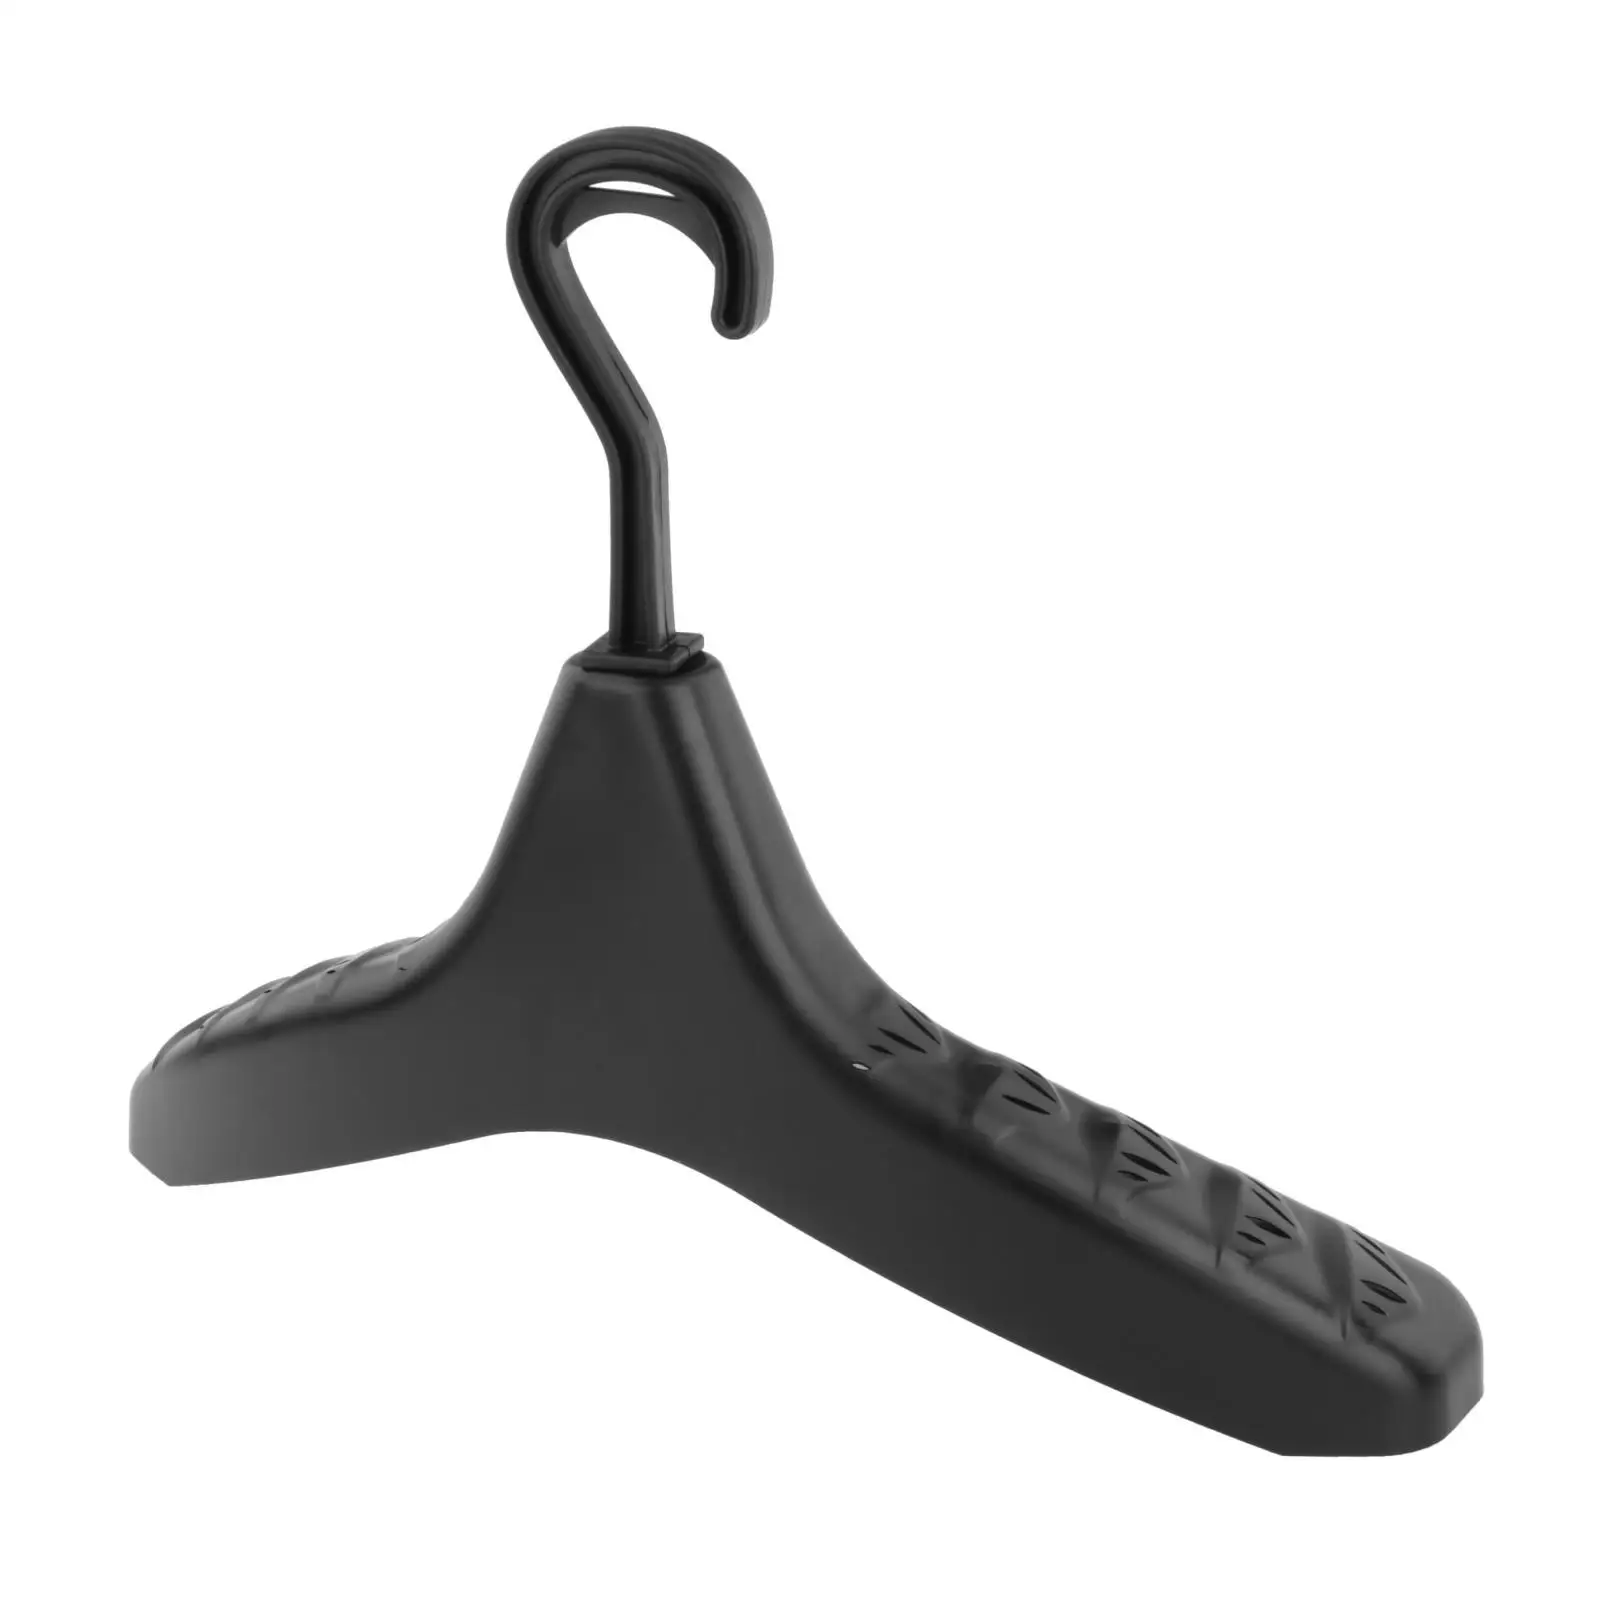 Wetsuit Hanger, Fast Dry Vented Multi-Purpose Hangers for Surfing Scuba Diving Wet Suits